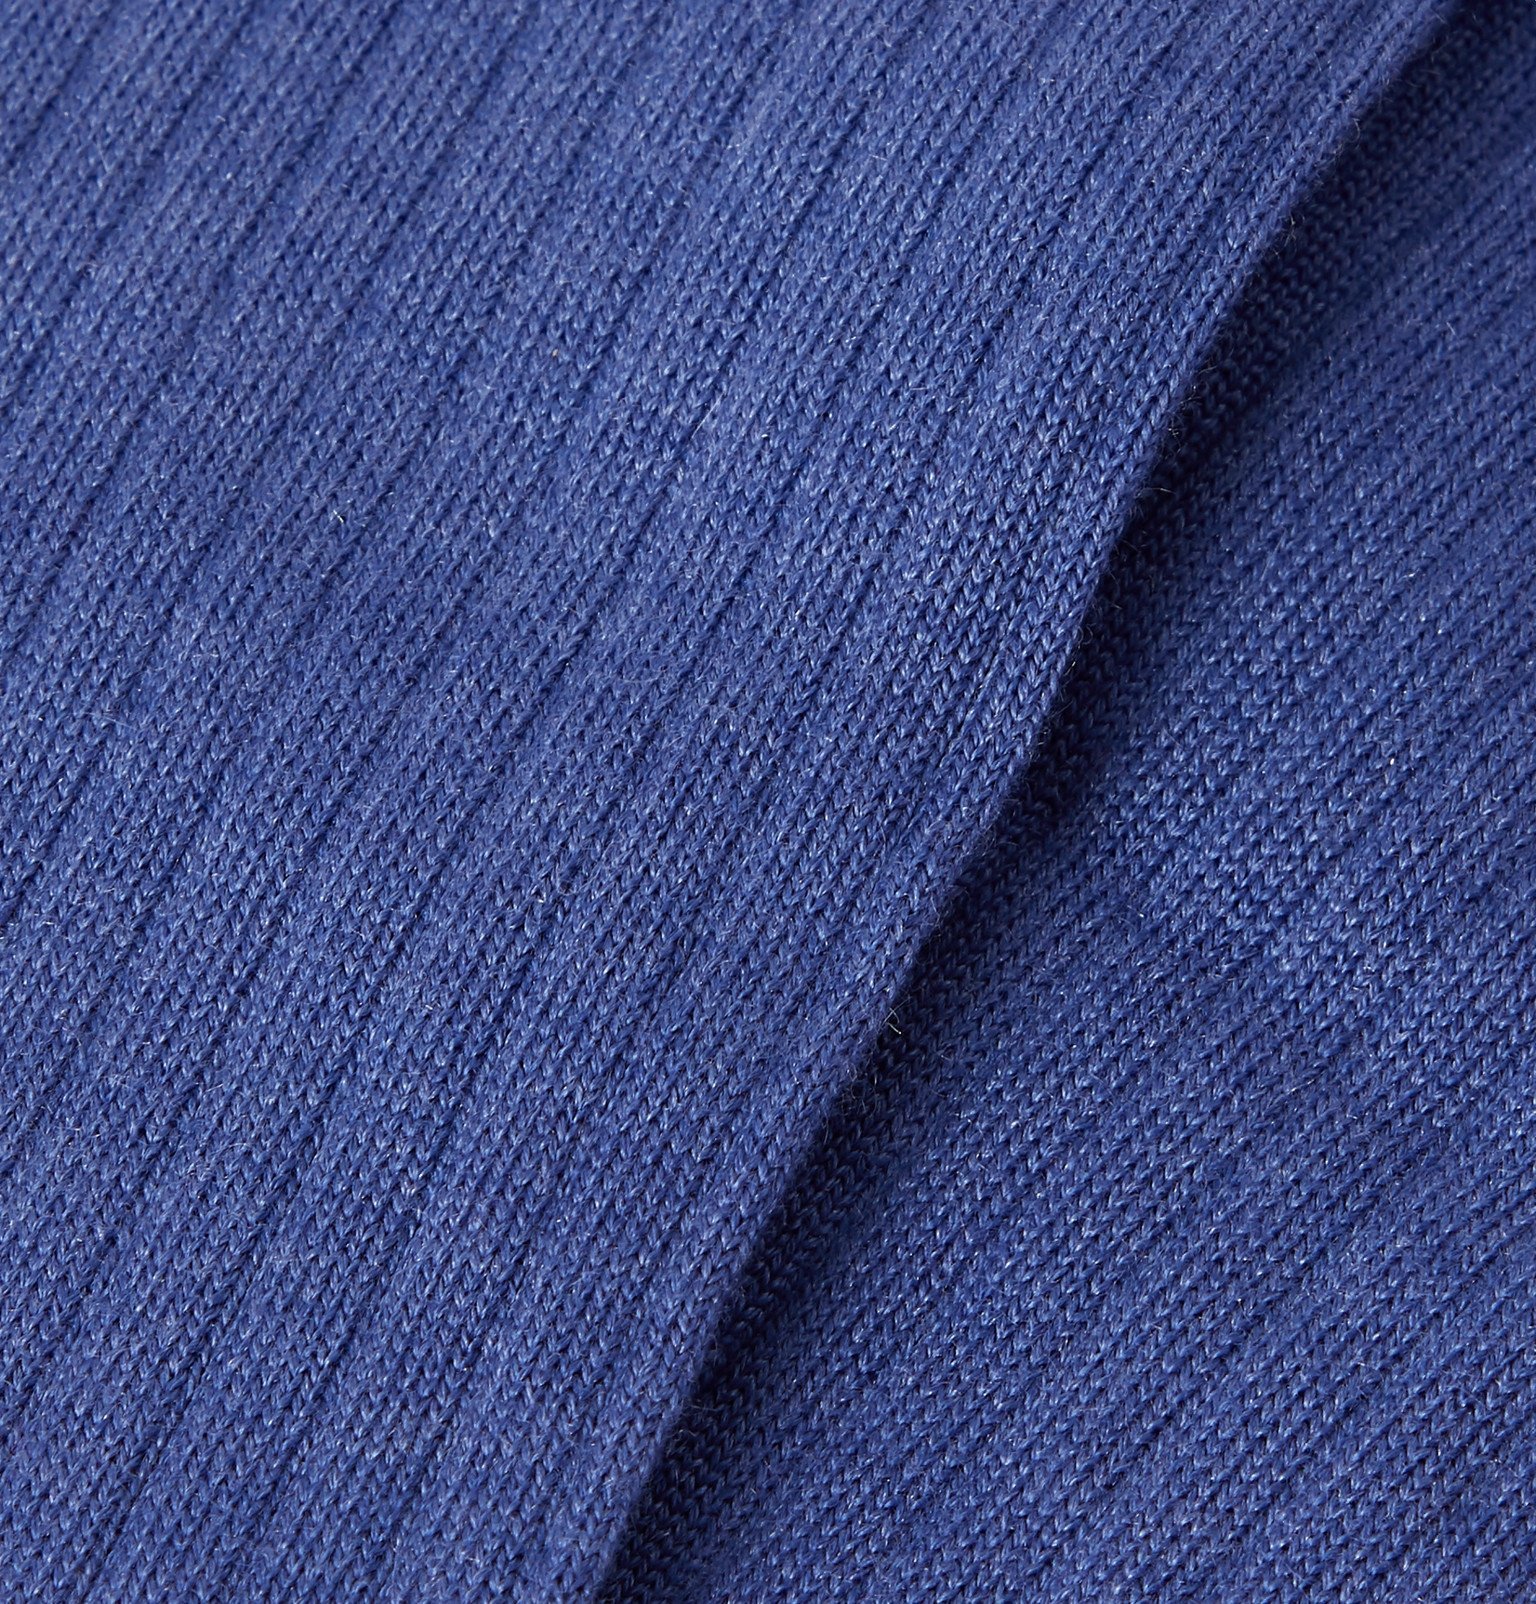 Charvet - Ribbed Cashmere, Wool and Silk-Blend Over-the-Calf Socks ...